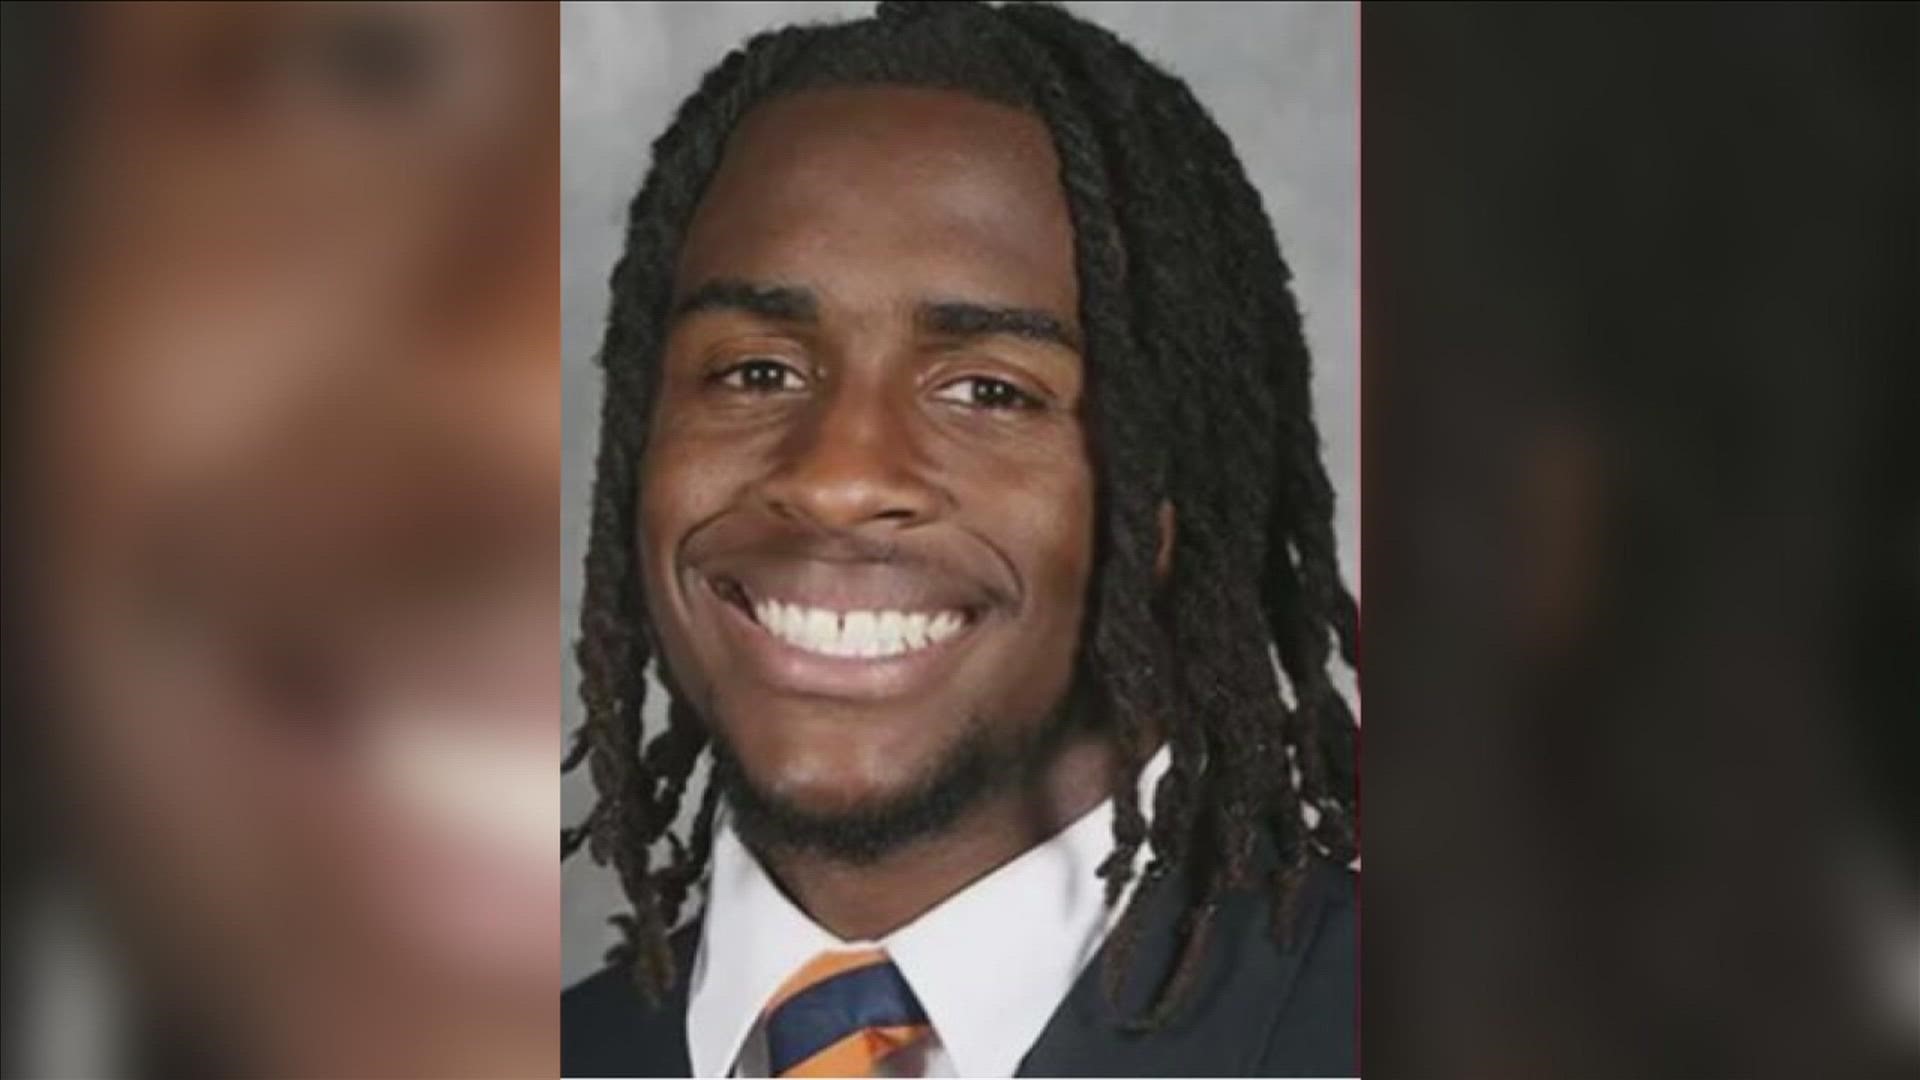 Former Arlington player Devin Chandler was identified as one of three players killed in a shooting on campus at University of Virginia in Charlottesville Sunday.